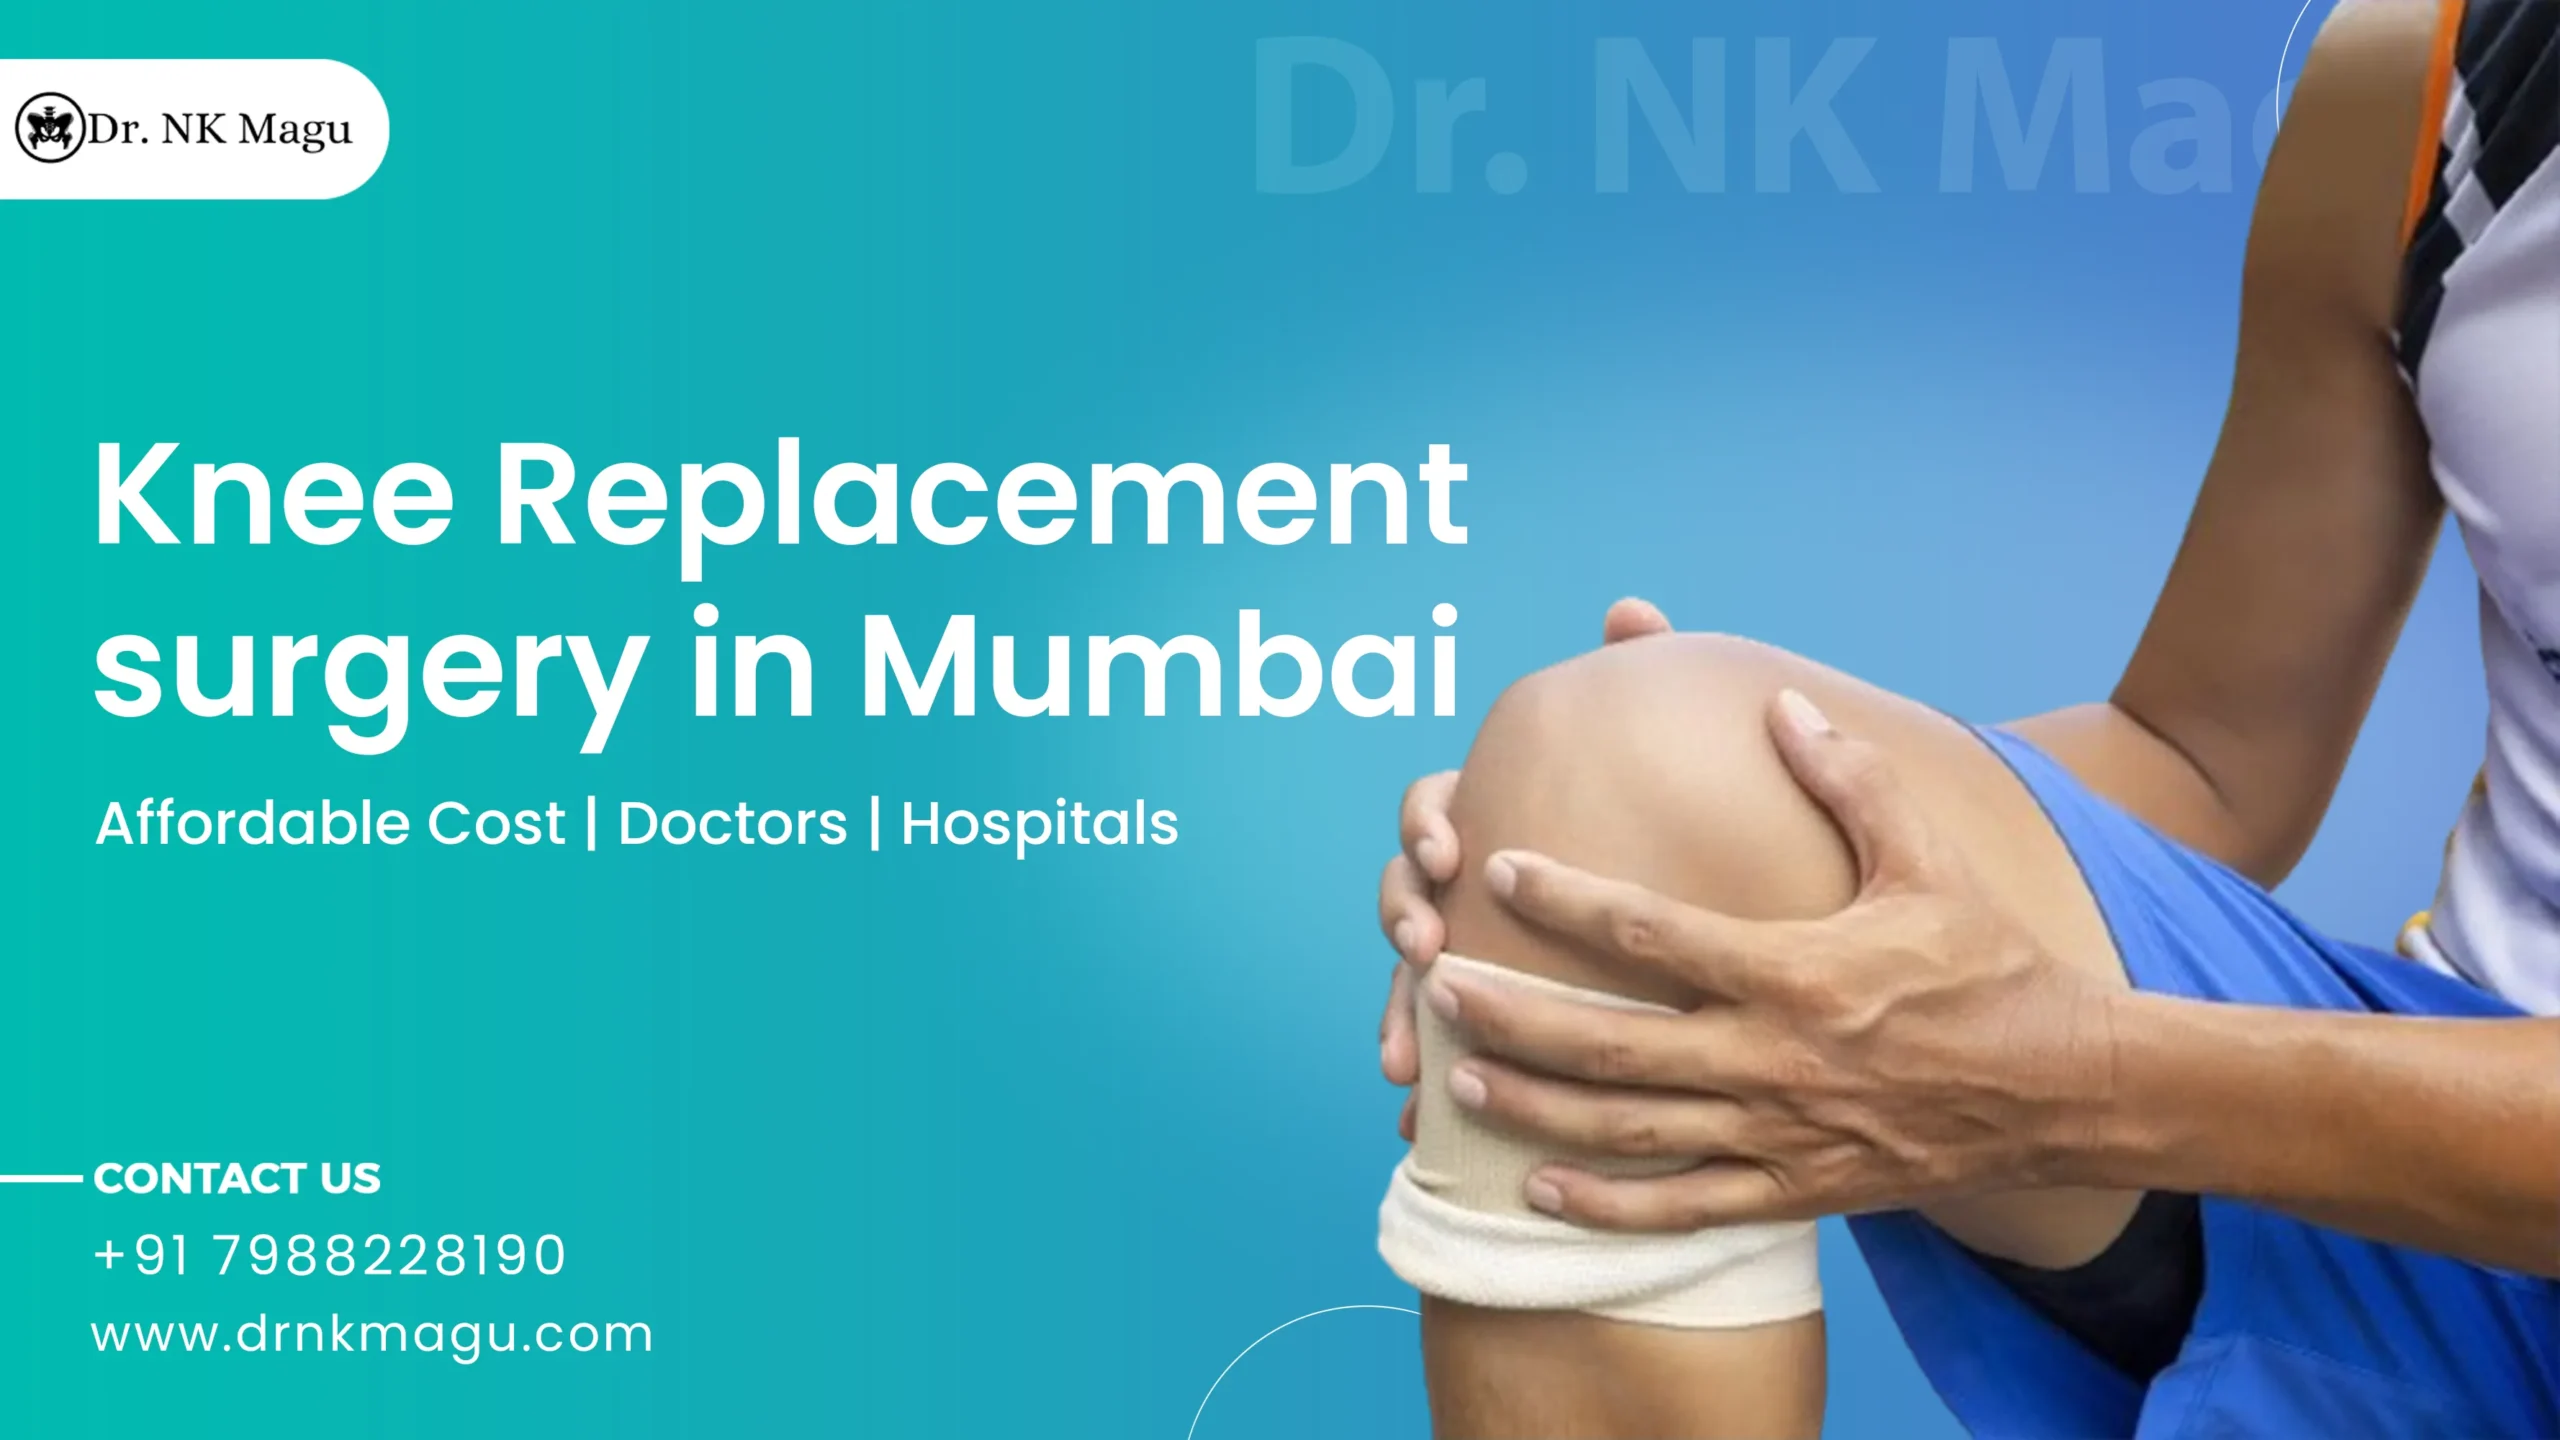 Knee Replacement Surgery Cost in Mumbai